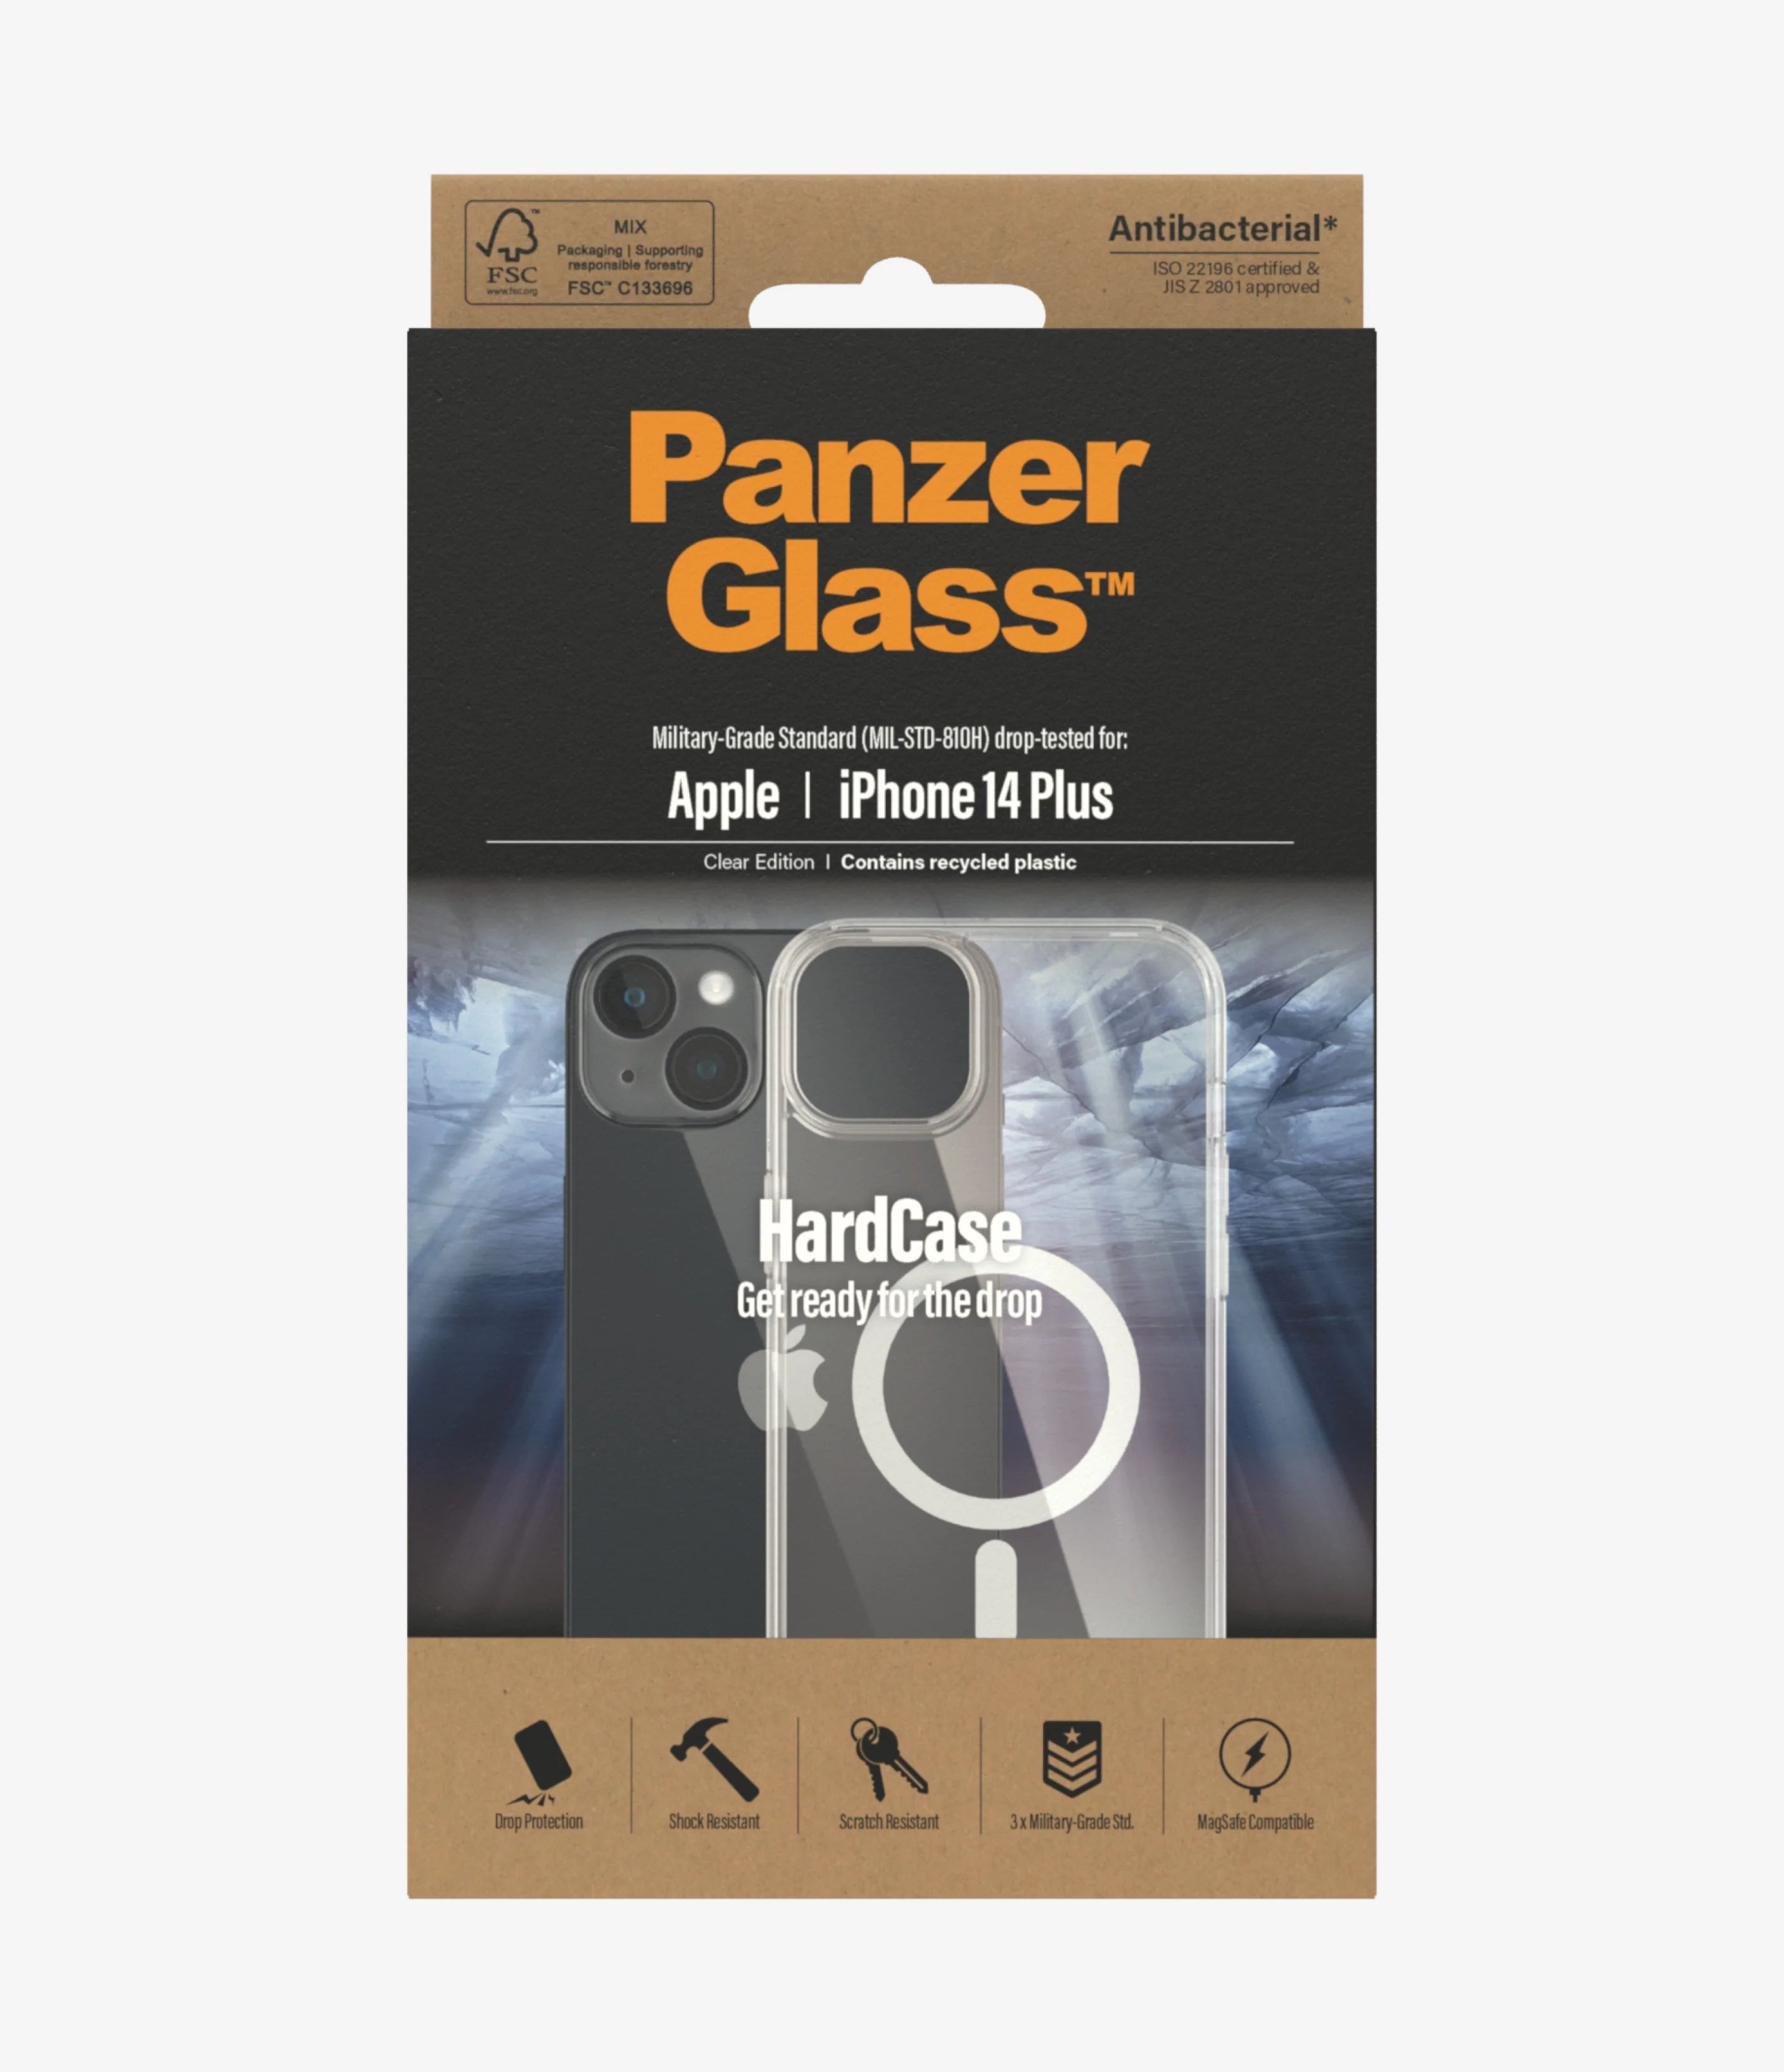 PanzerGlass HardCase Clear + MagSafe Case for iPhone 14 Plus